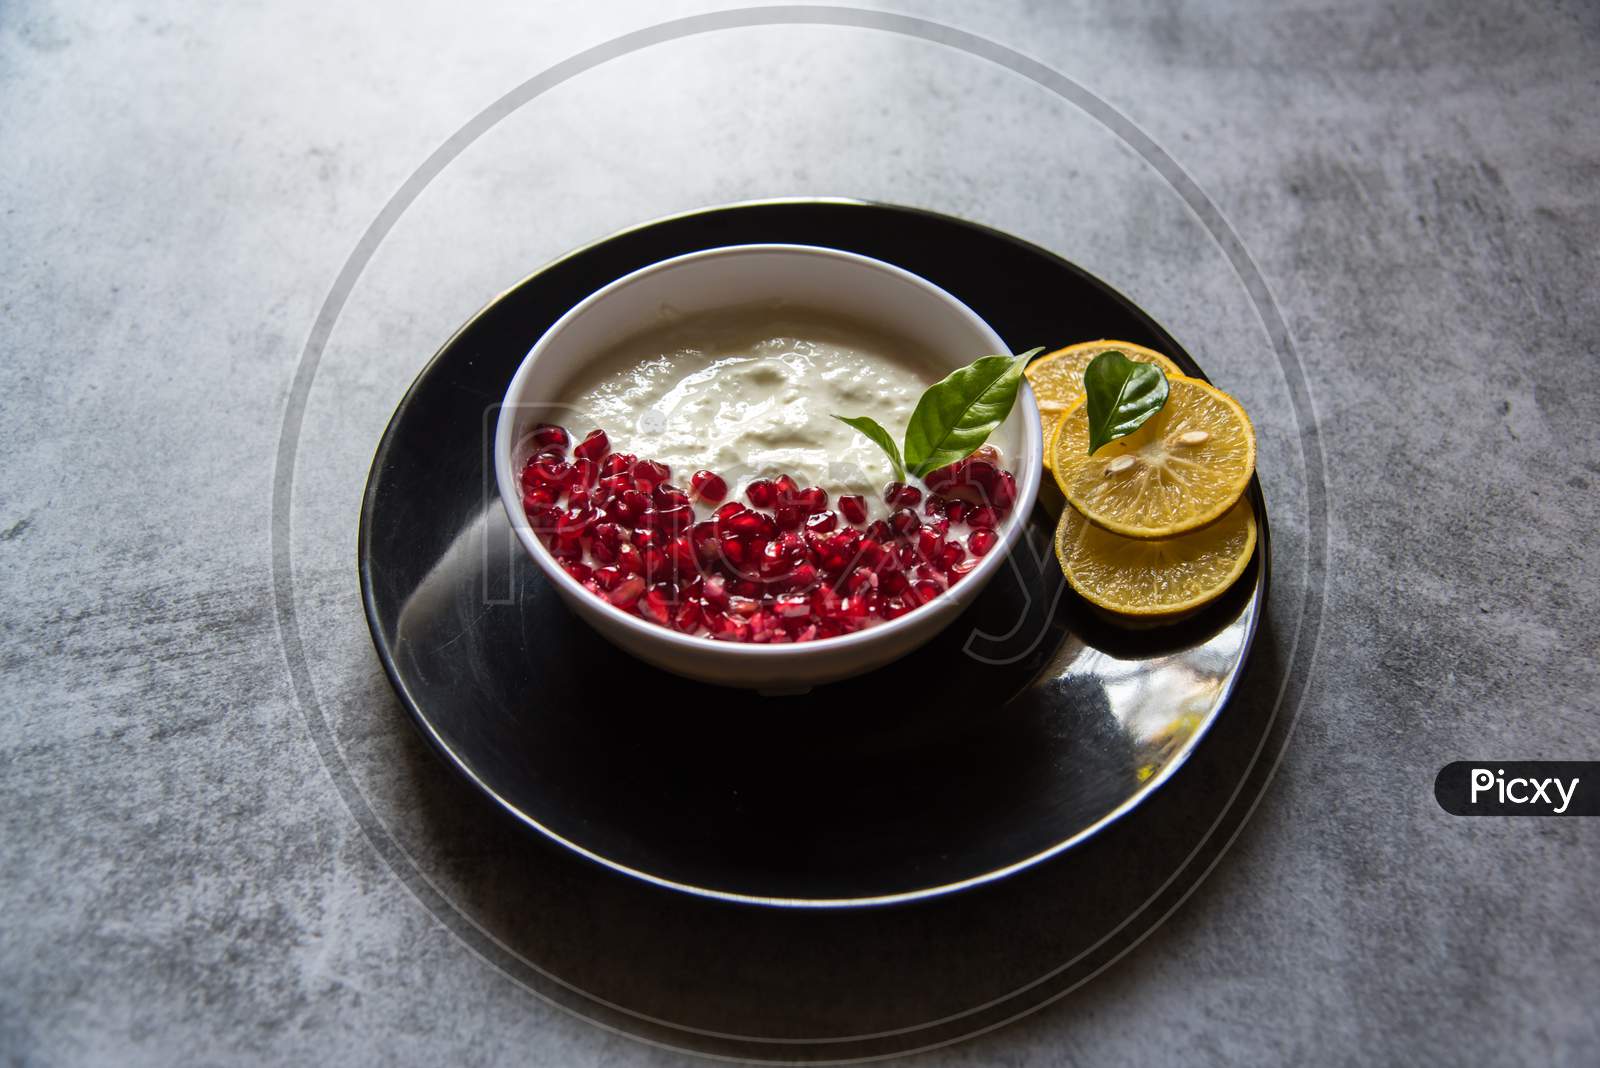 Pomegranate seeds and fresh yogurt in a bowl